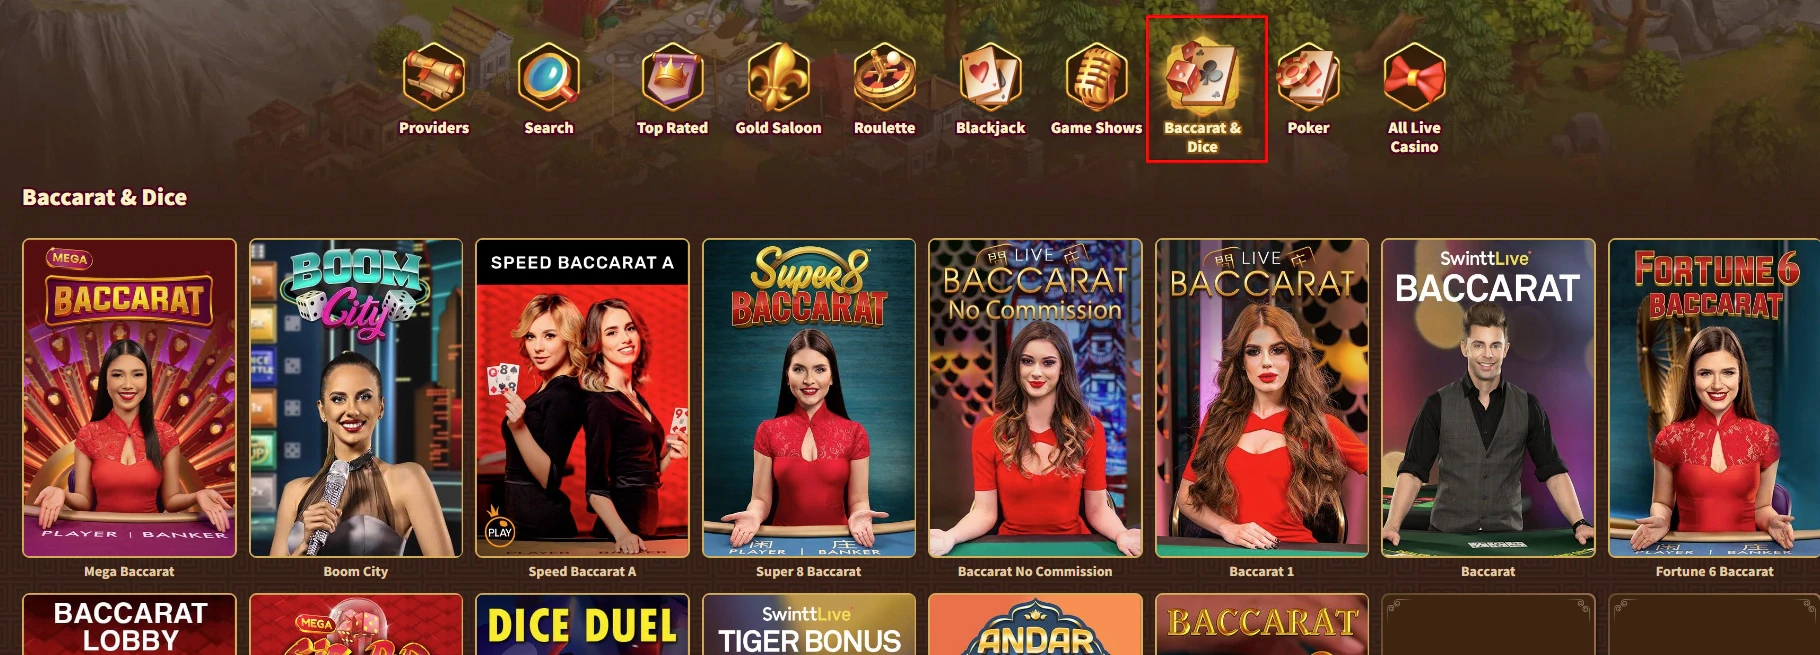 MyEmpire Casino Baccarat Game Selection